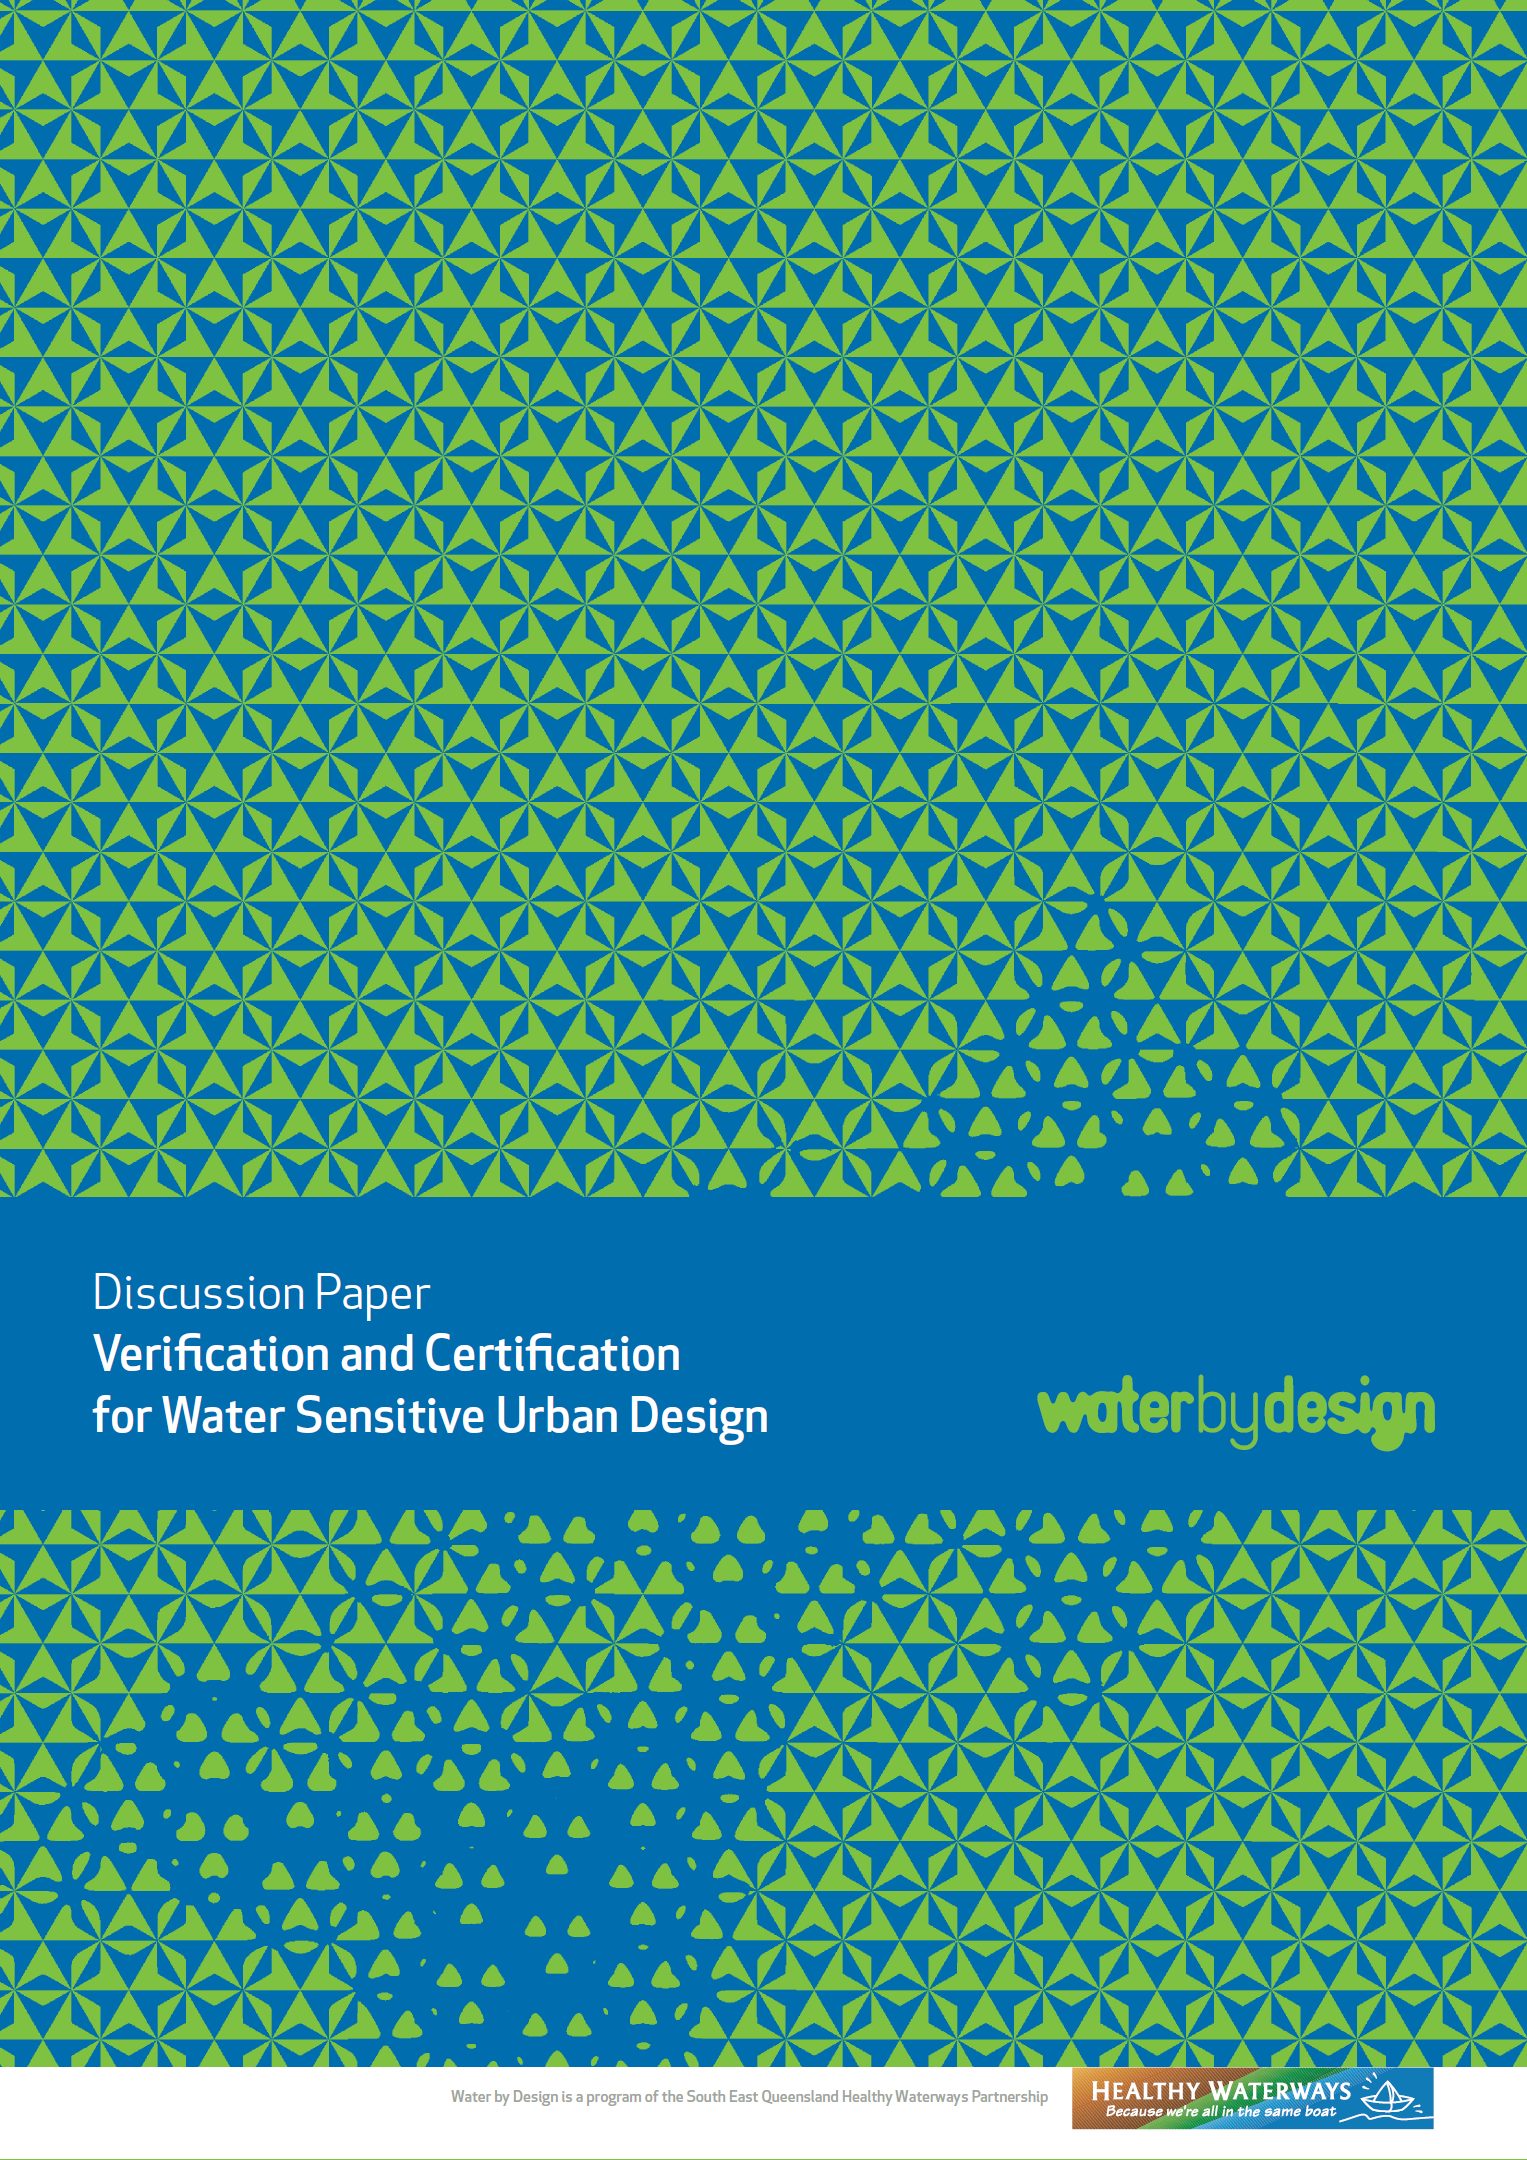 Verification and Certification for Water Sensitive Urban Design (2009)